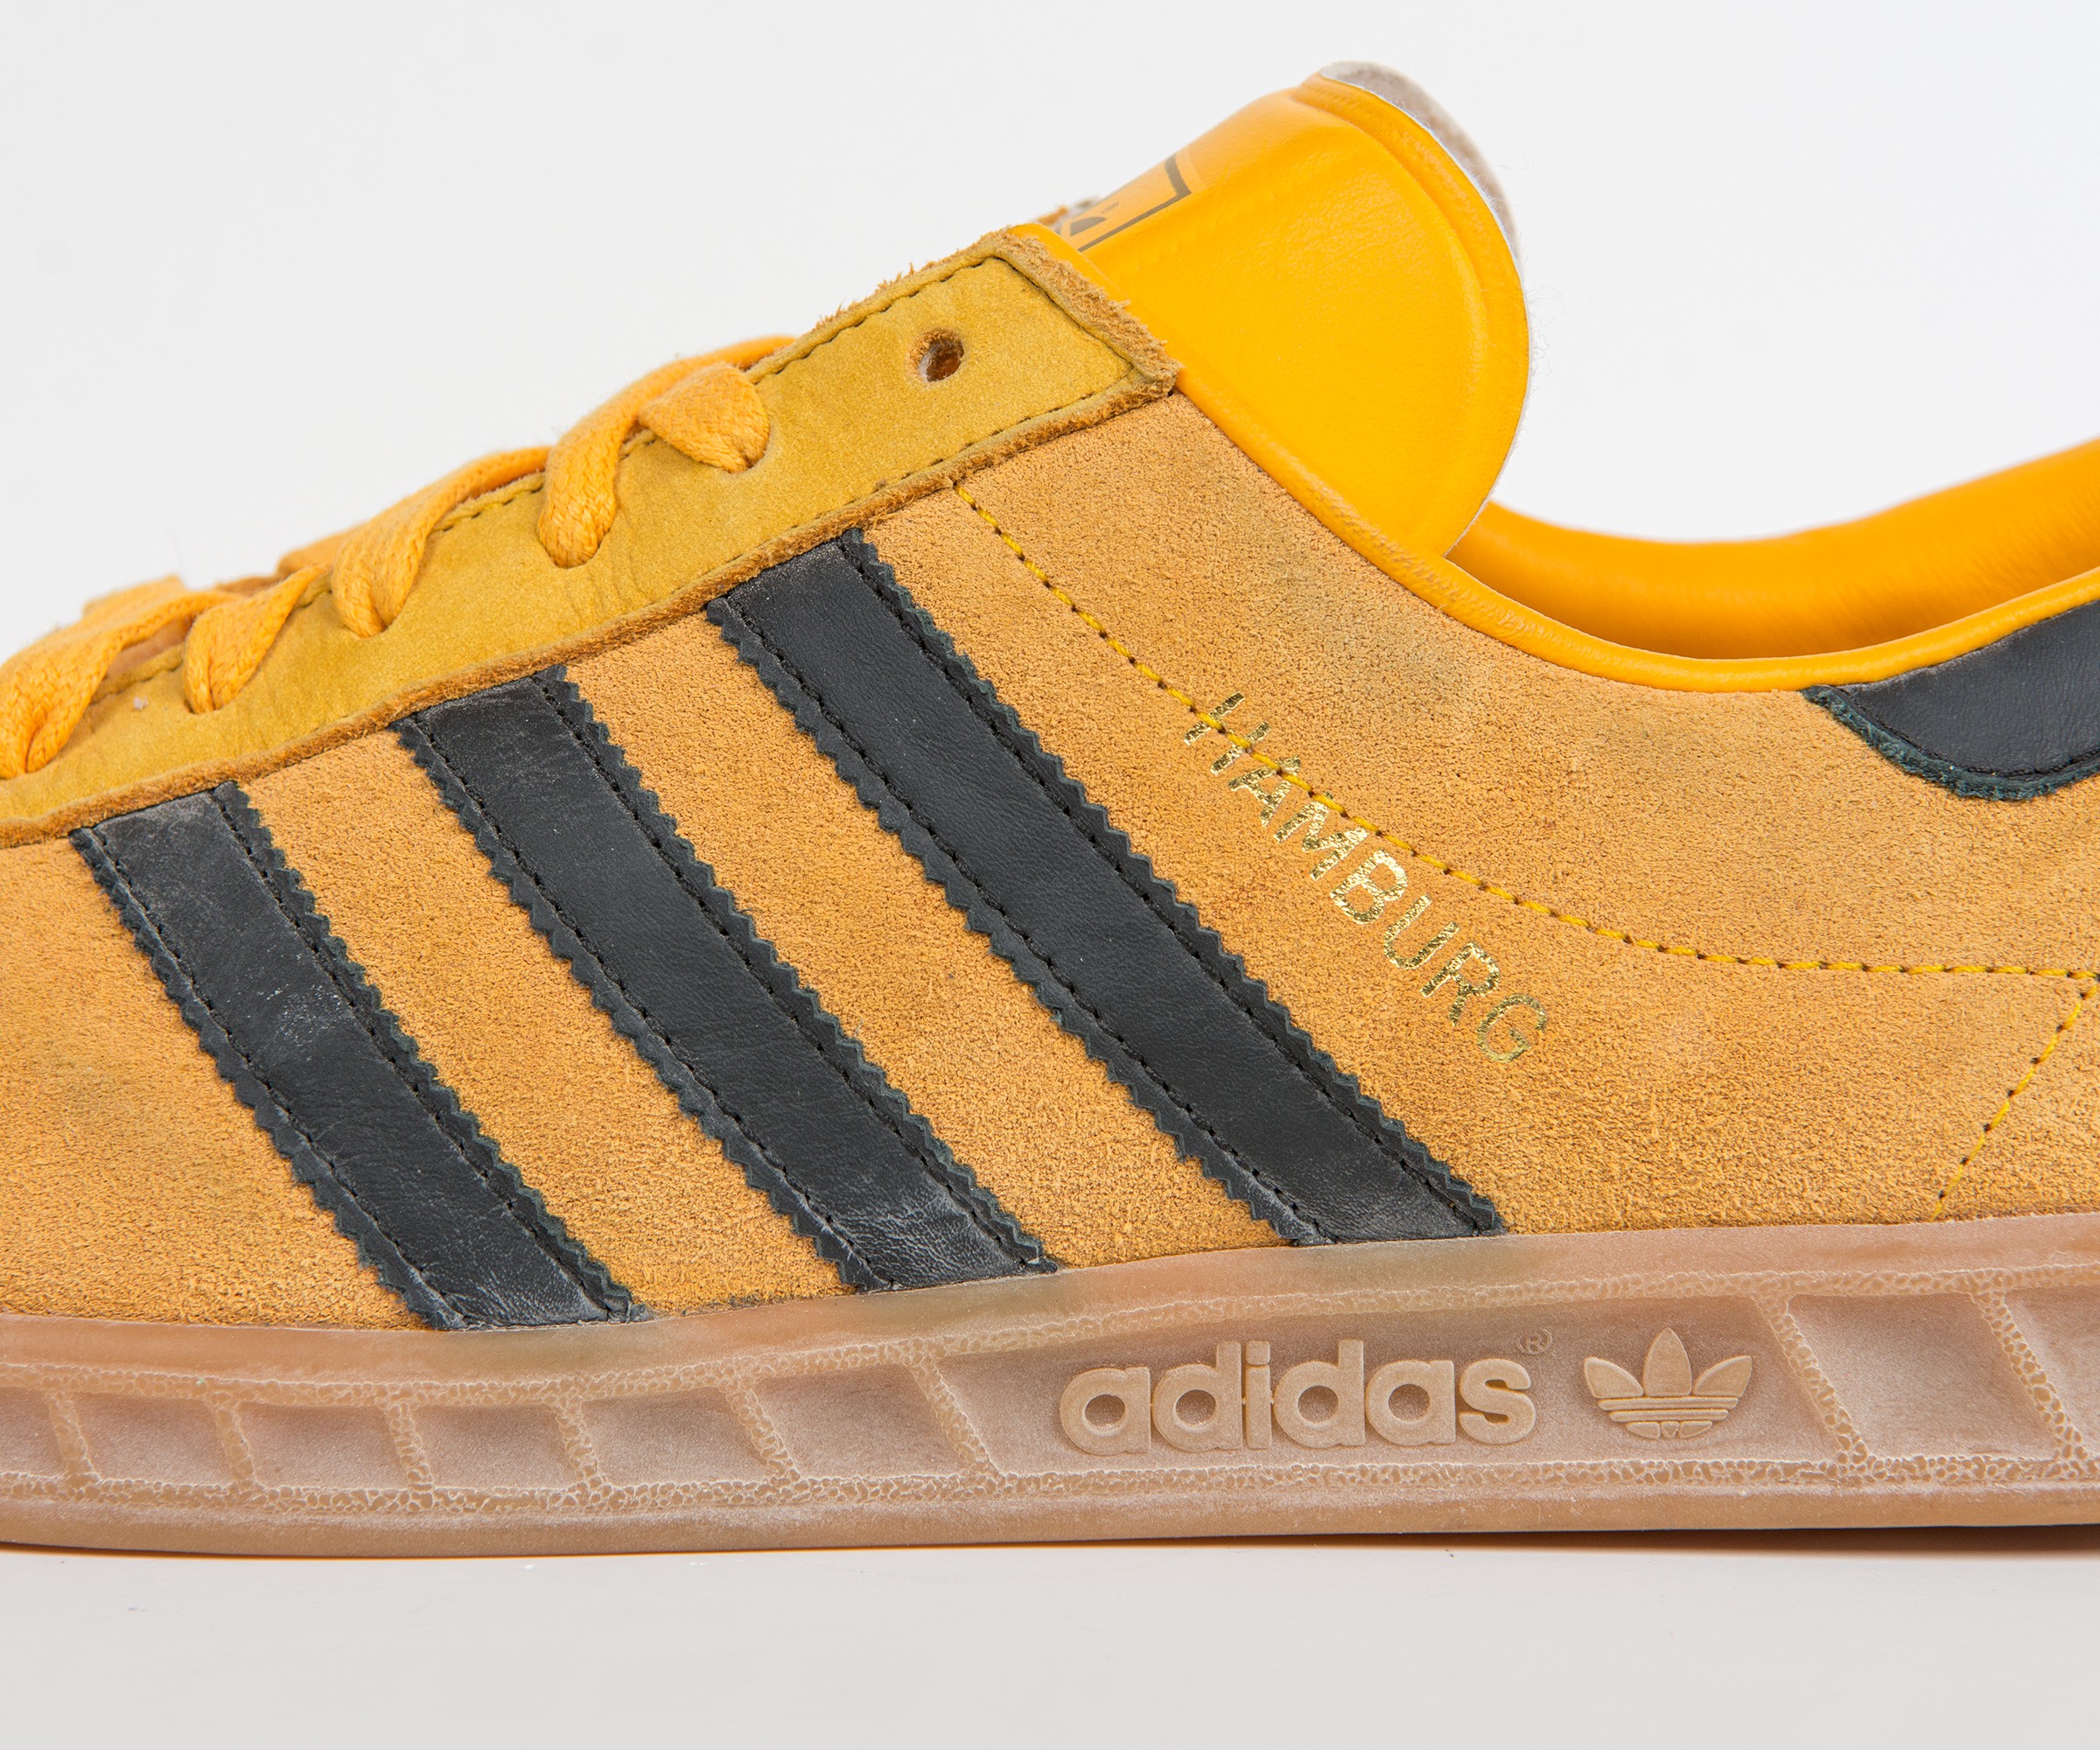 RE-POCKETS ADIDAS TRAINERS Yellow/Black